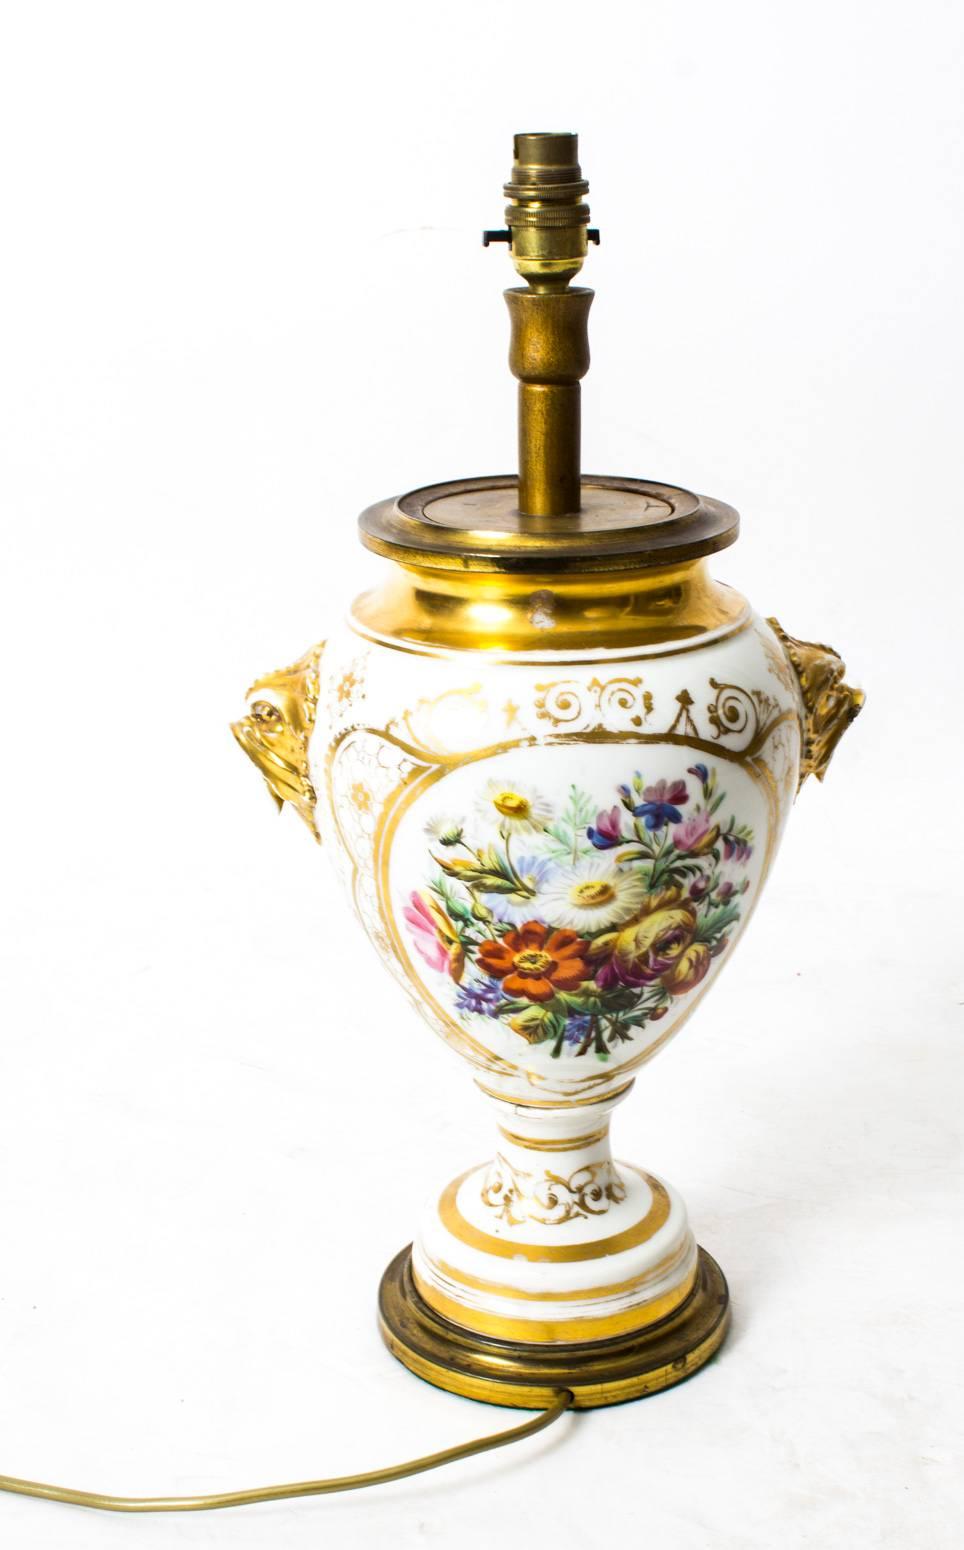 19th Century French Hand-Painted and Gilt Porcelain Lamp For Sale 3